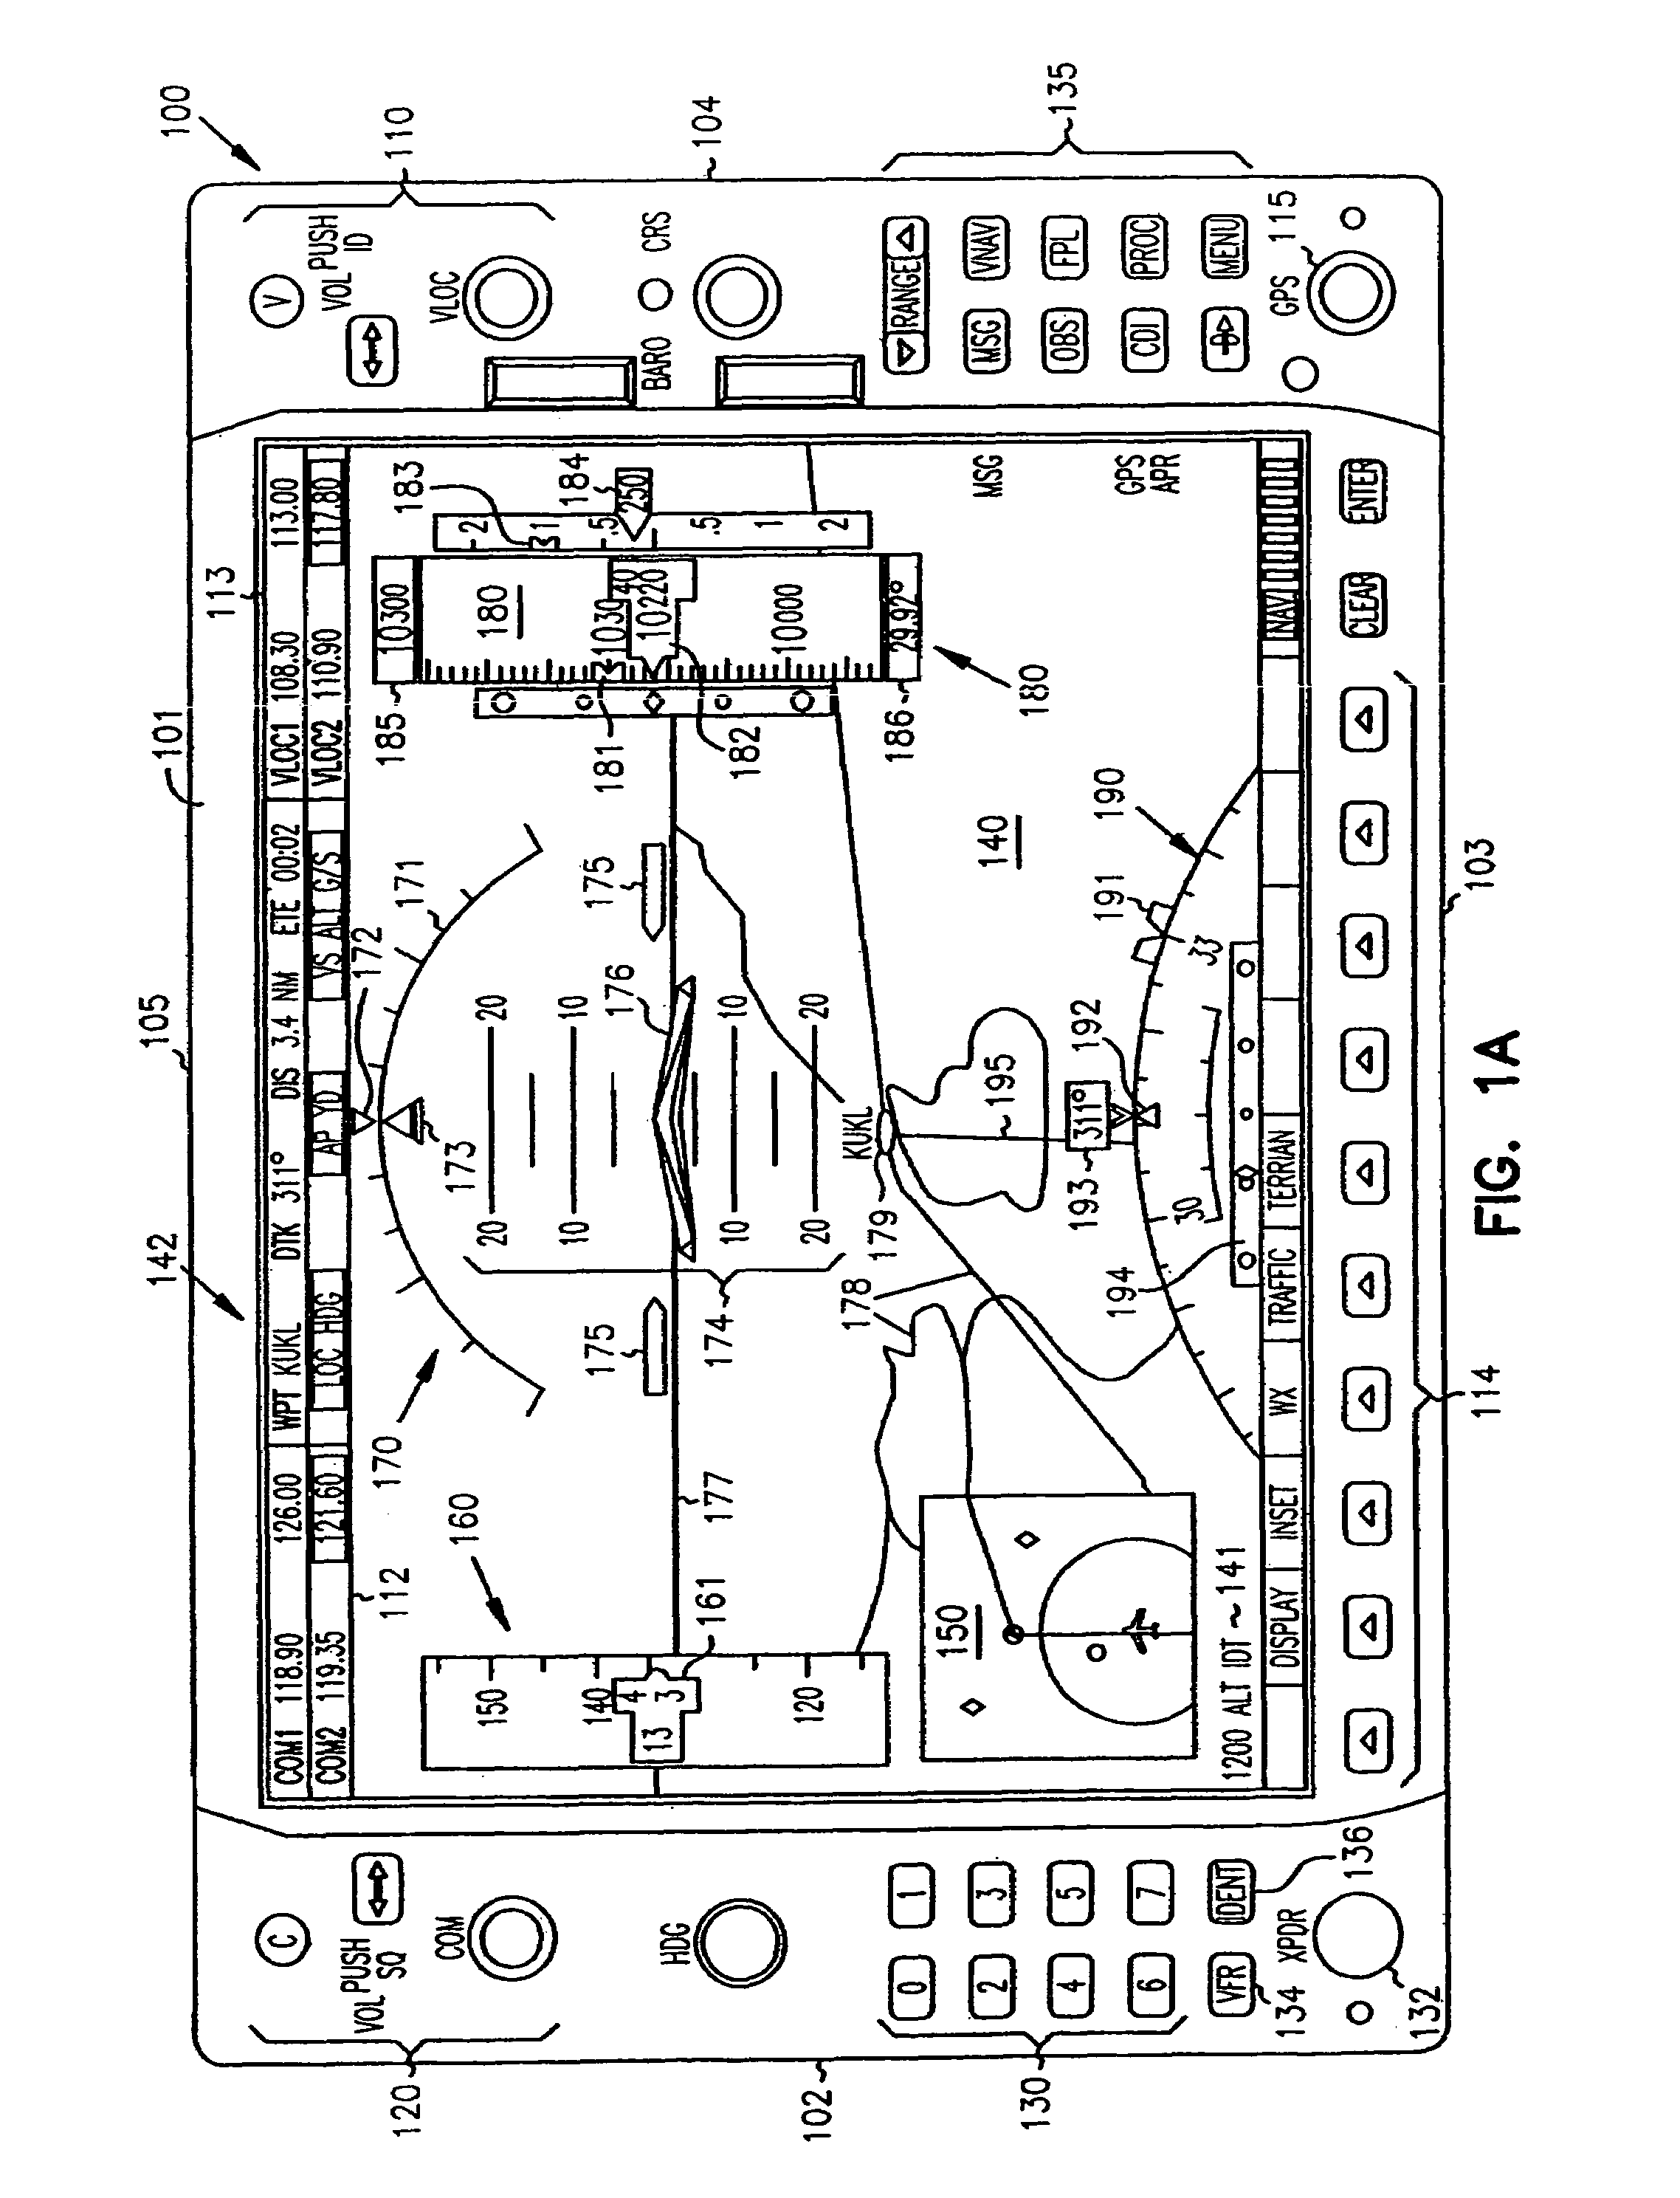 Cockpit instrument panel systems and methods with variable perspective flight display